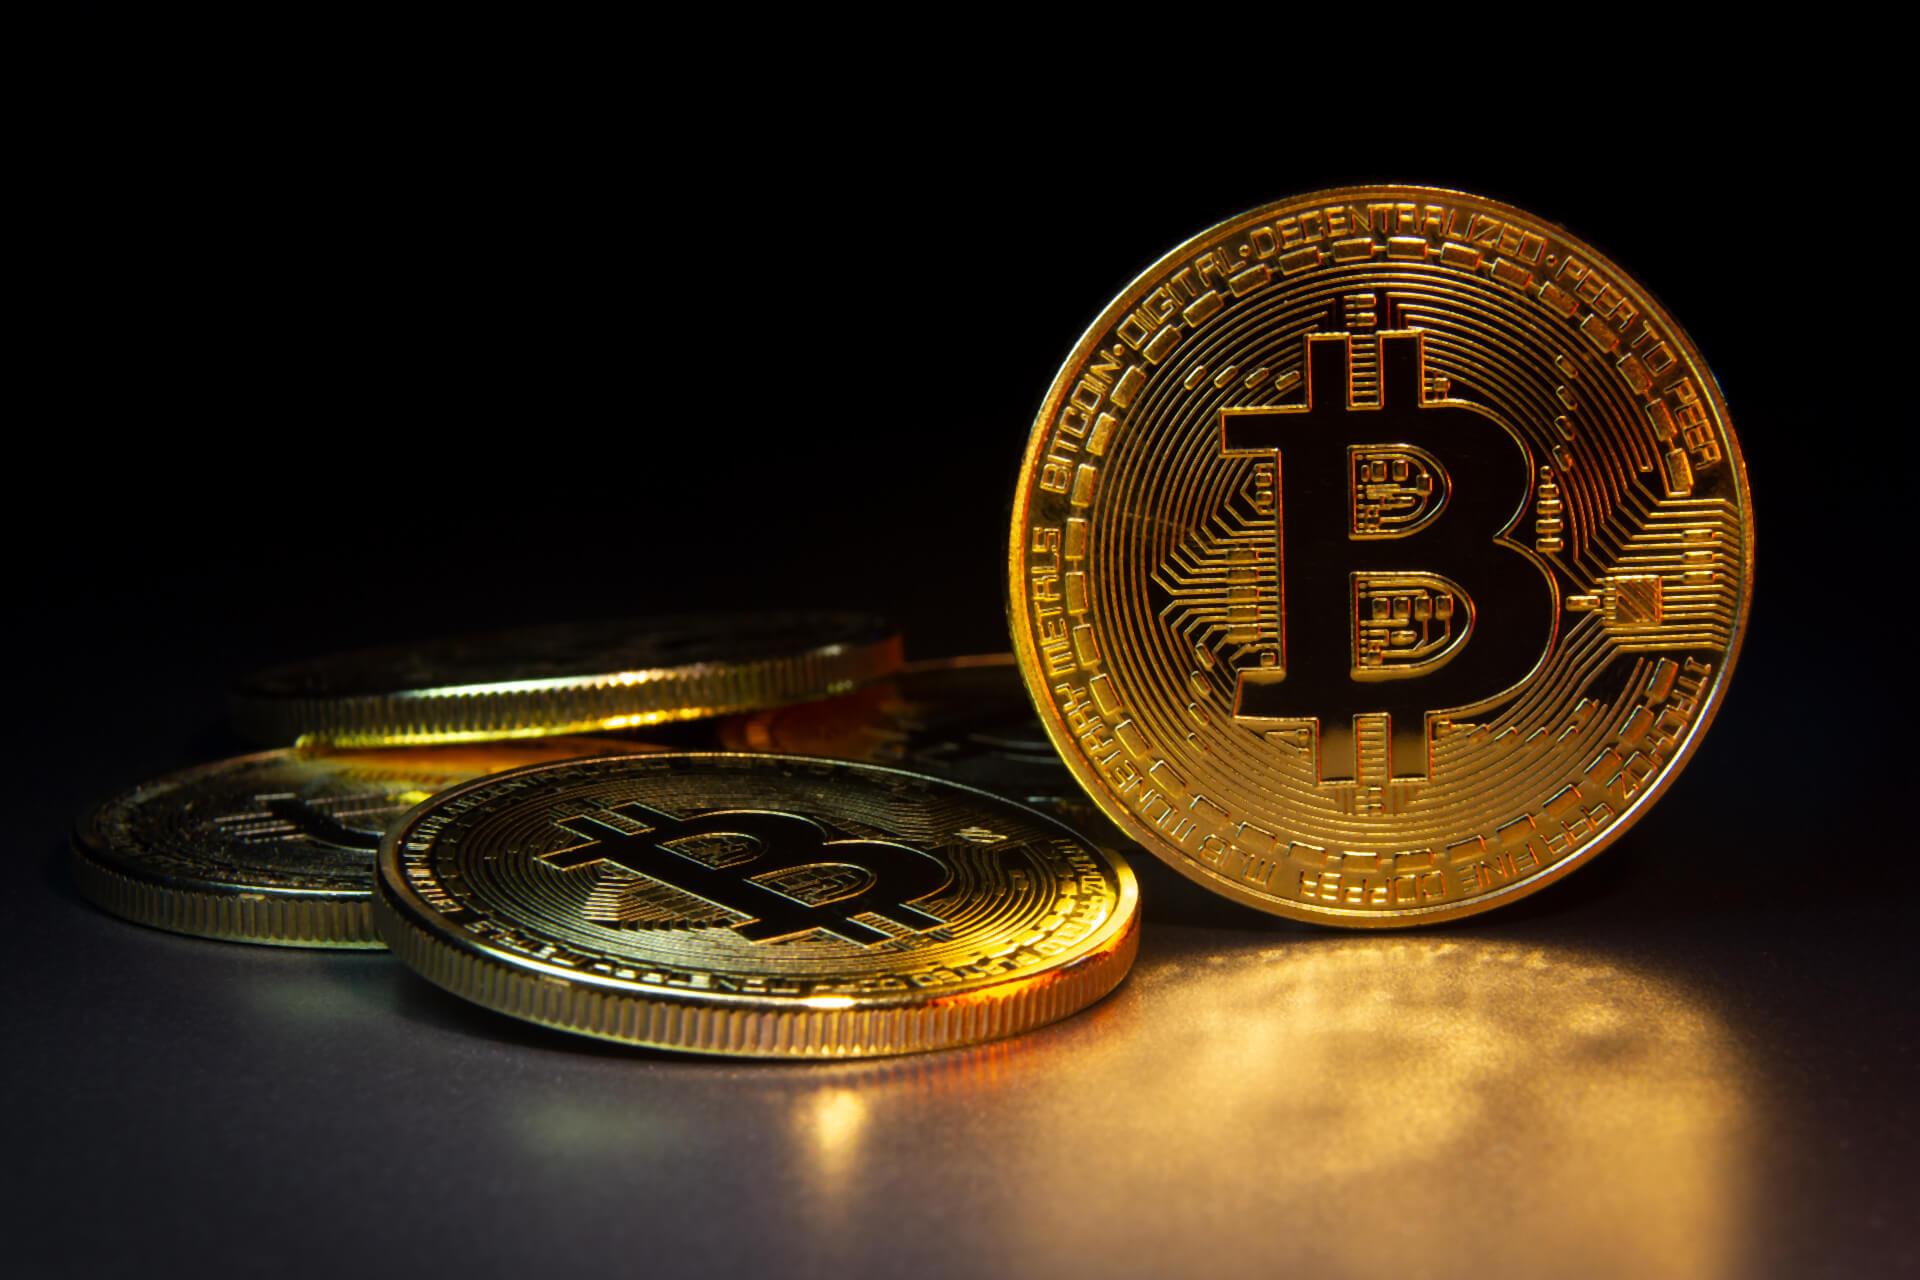 Bitcoin on edge with others free image download